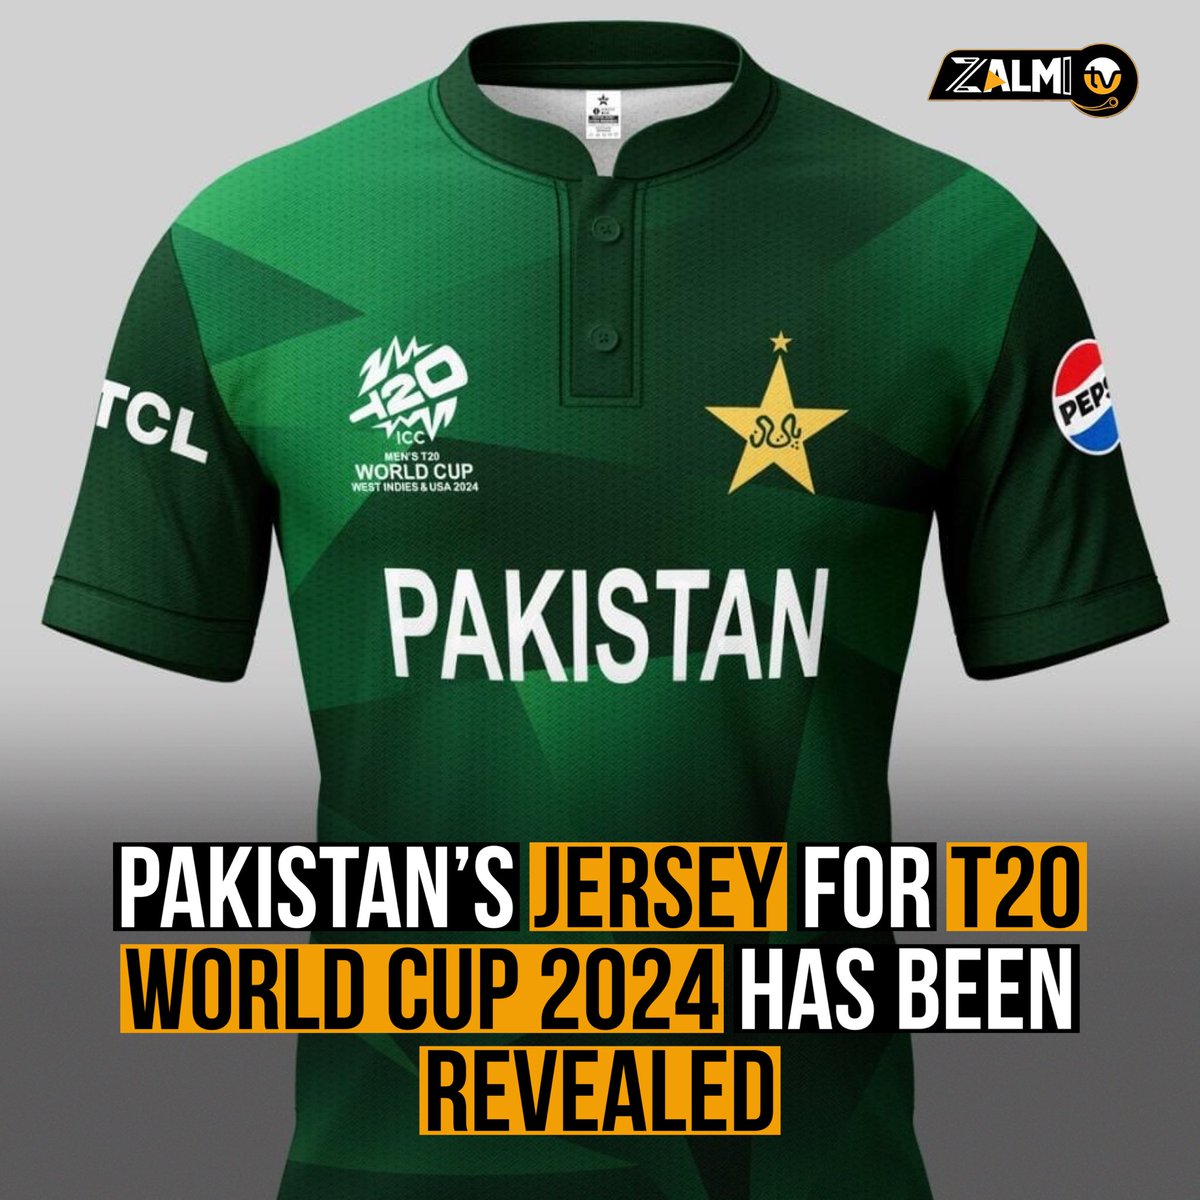 Pakistan’s jersey for T20 World Cup 2024 looks 🔥 #PakistanCricket #T20WorldCup2024 #ZalmiTV